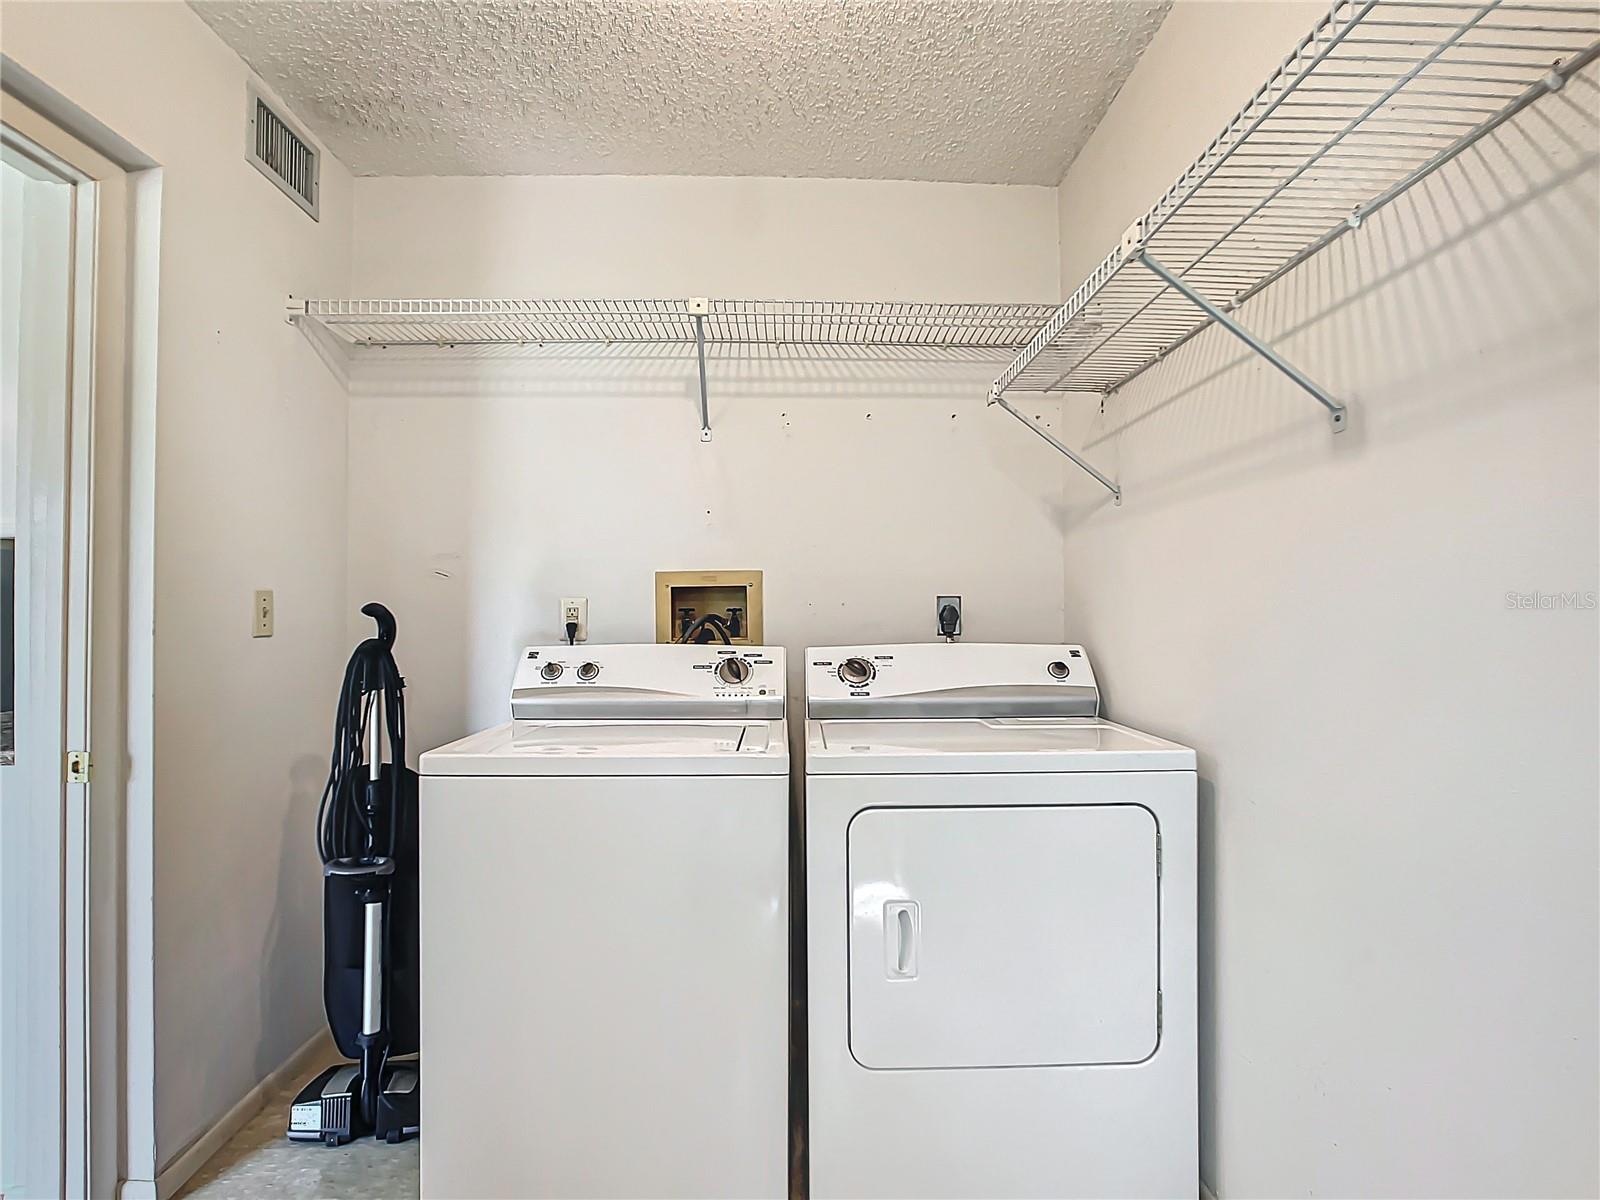 Laundry Room has full size washer /dryer.